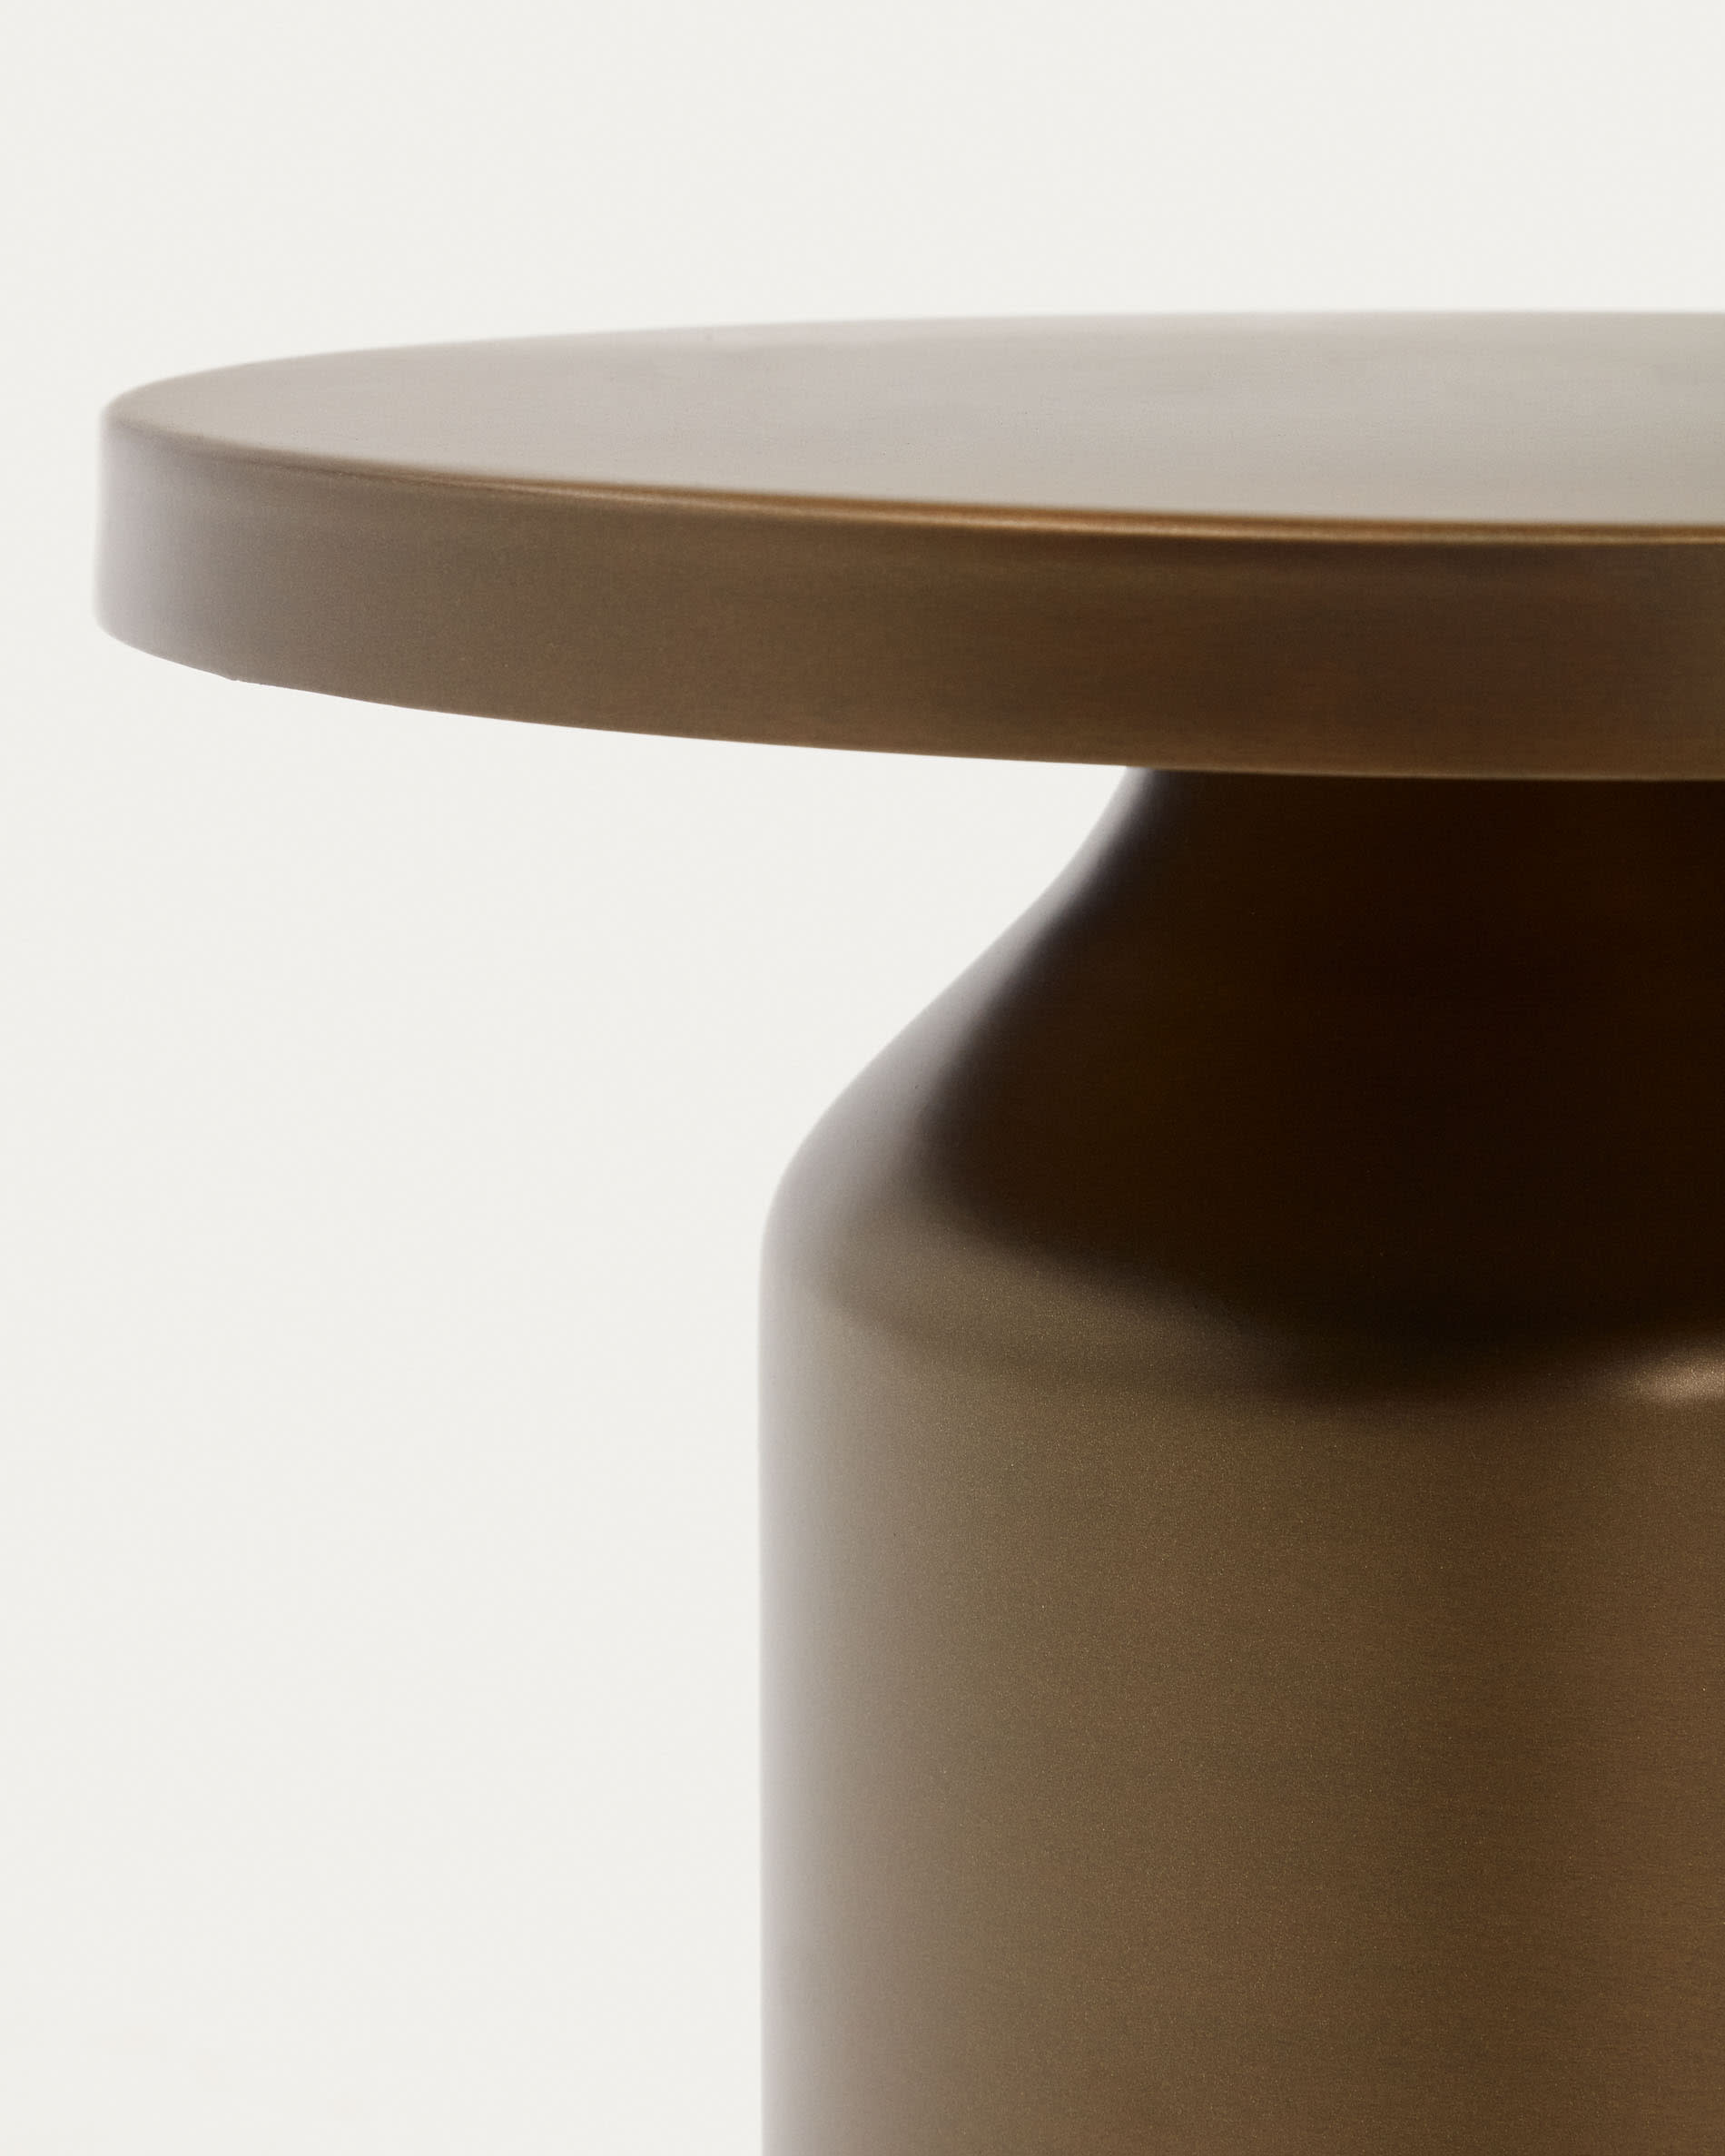 Malya metal round cm brushed 40.5 in Ø copper | table Kave side Home